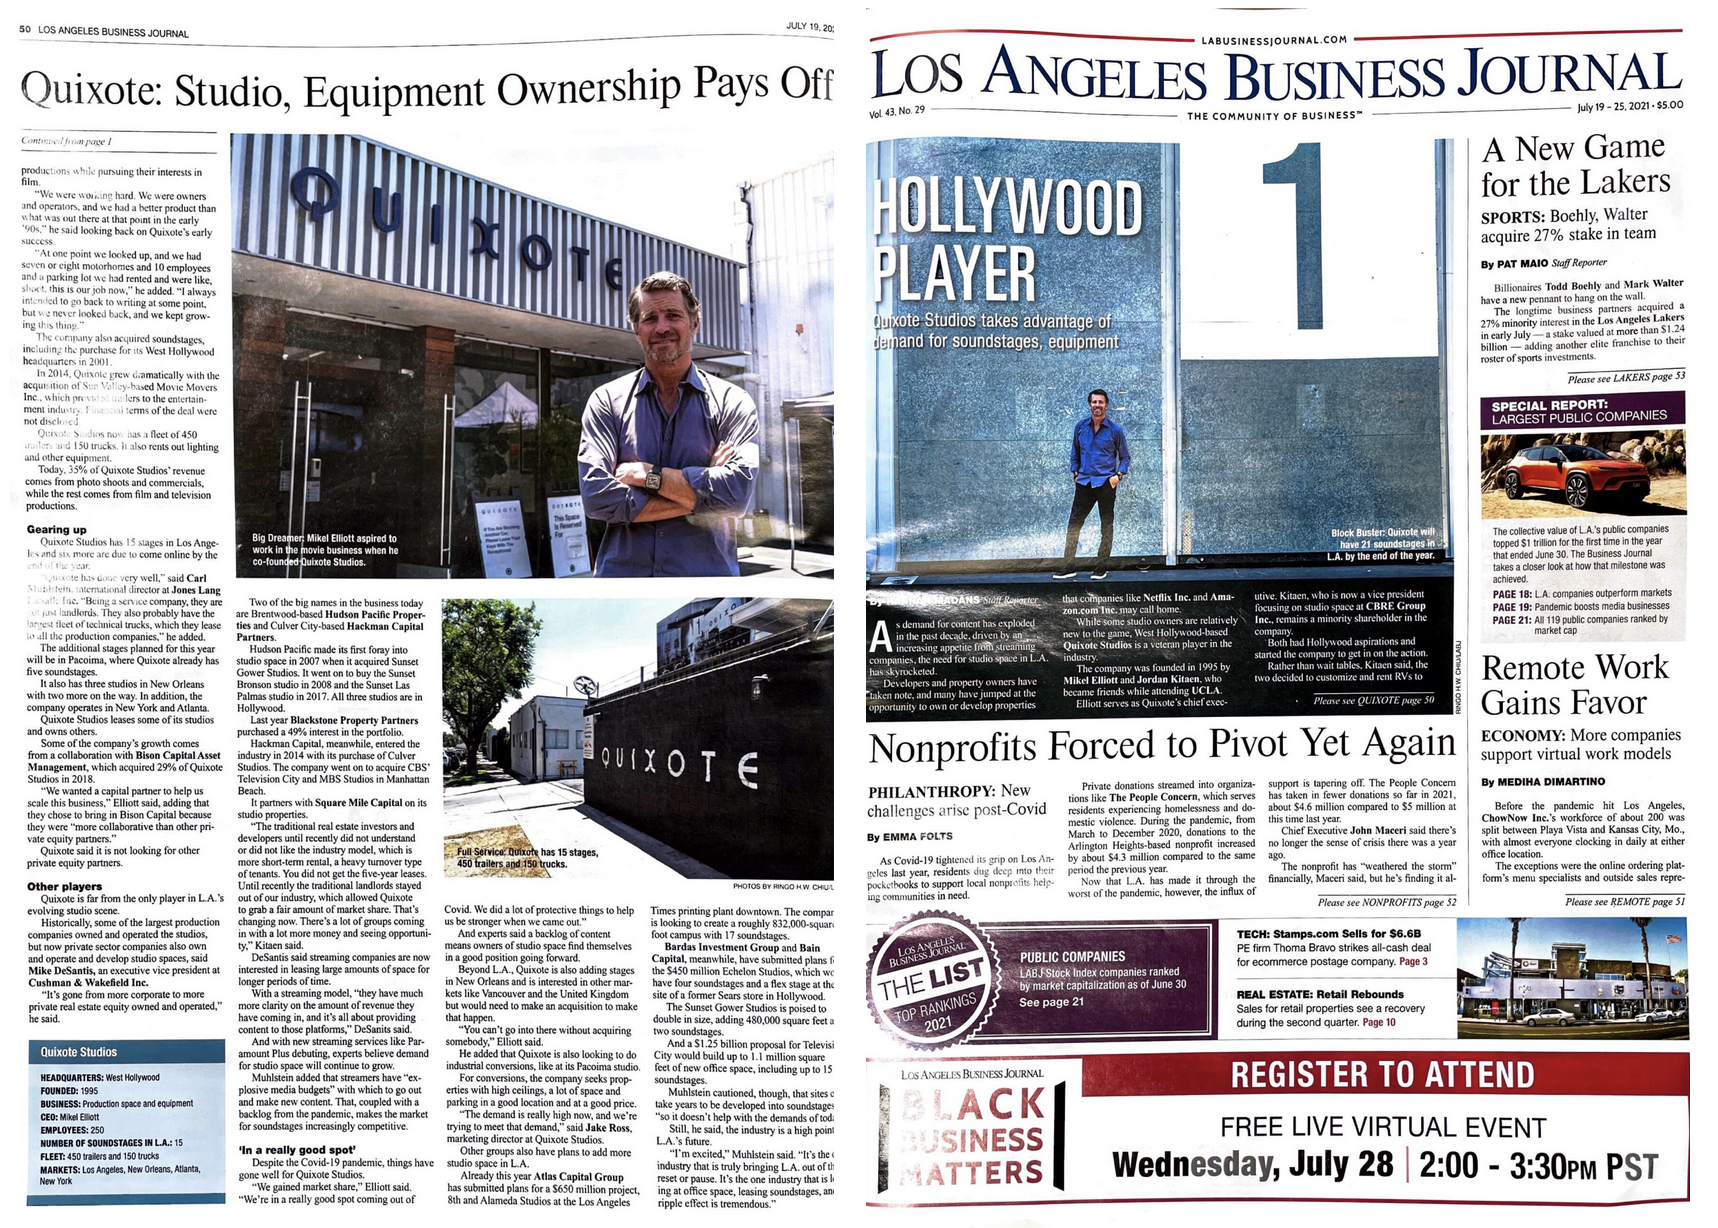 Los Angeles Business Journal:Hollywood Player